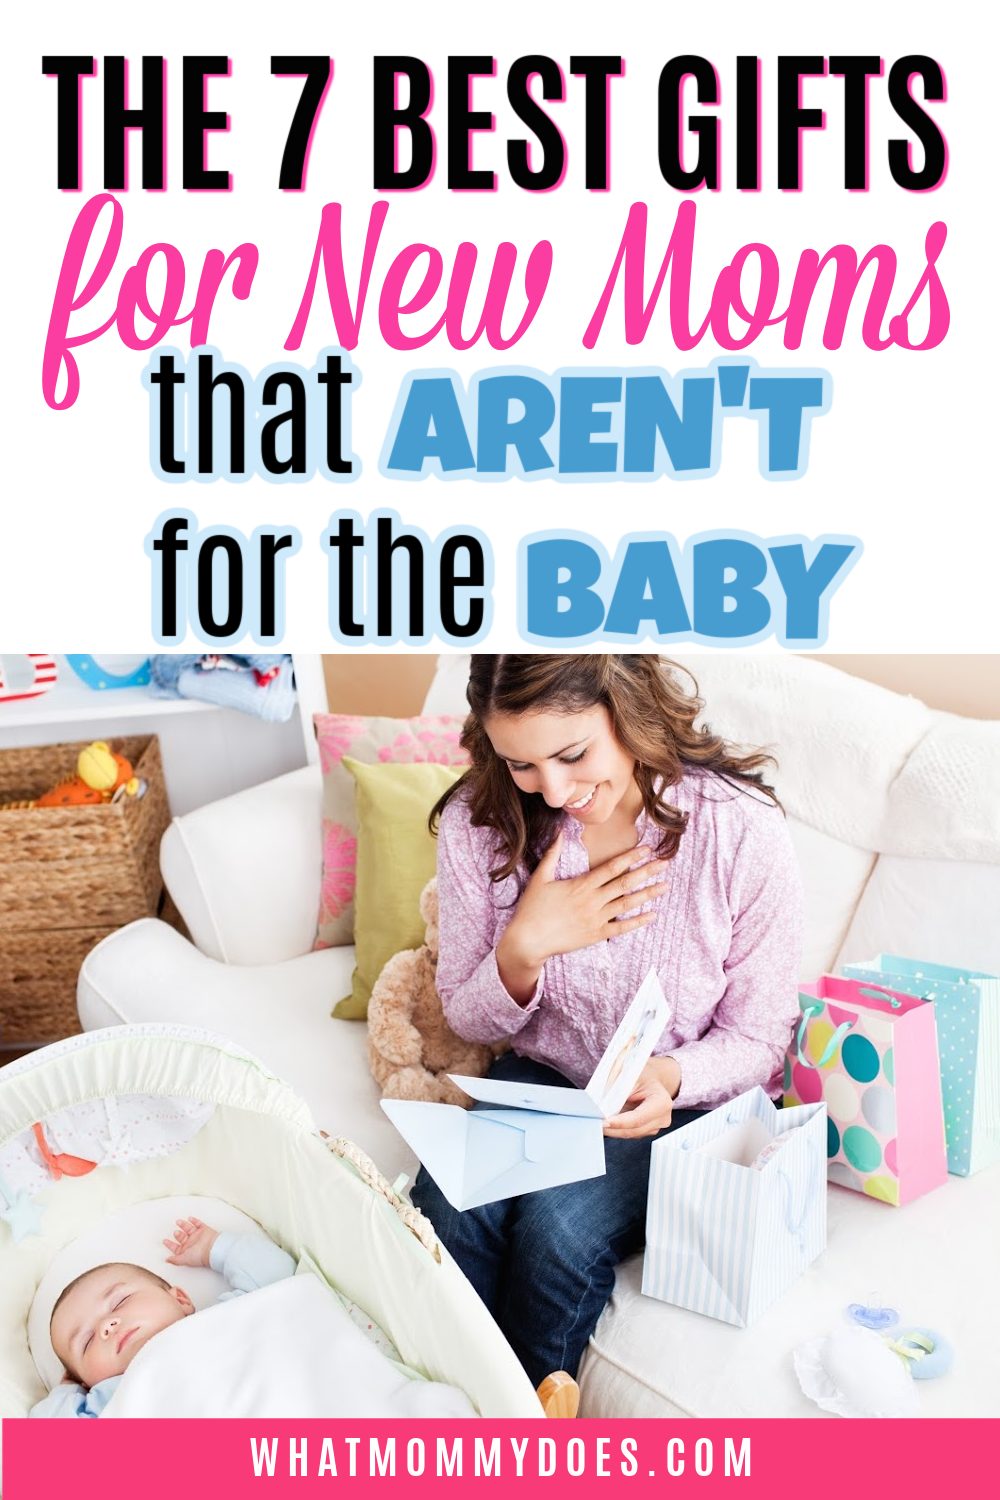 The 7 best new mom gifts that are for her, not the baby.